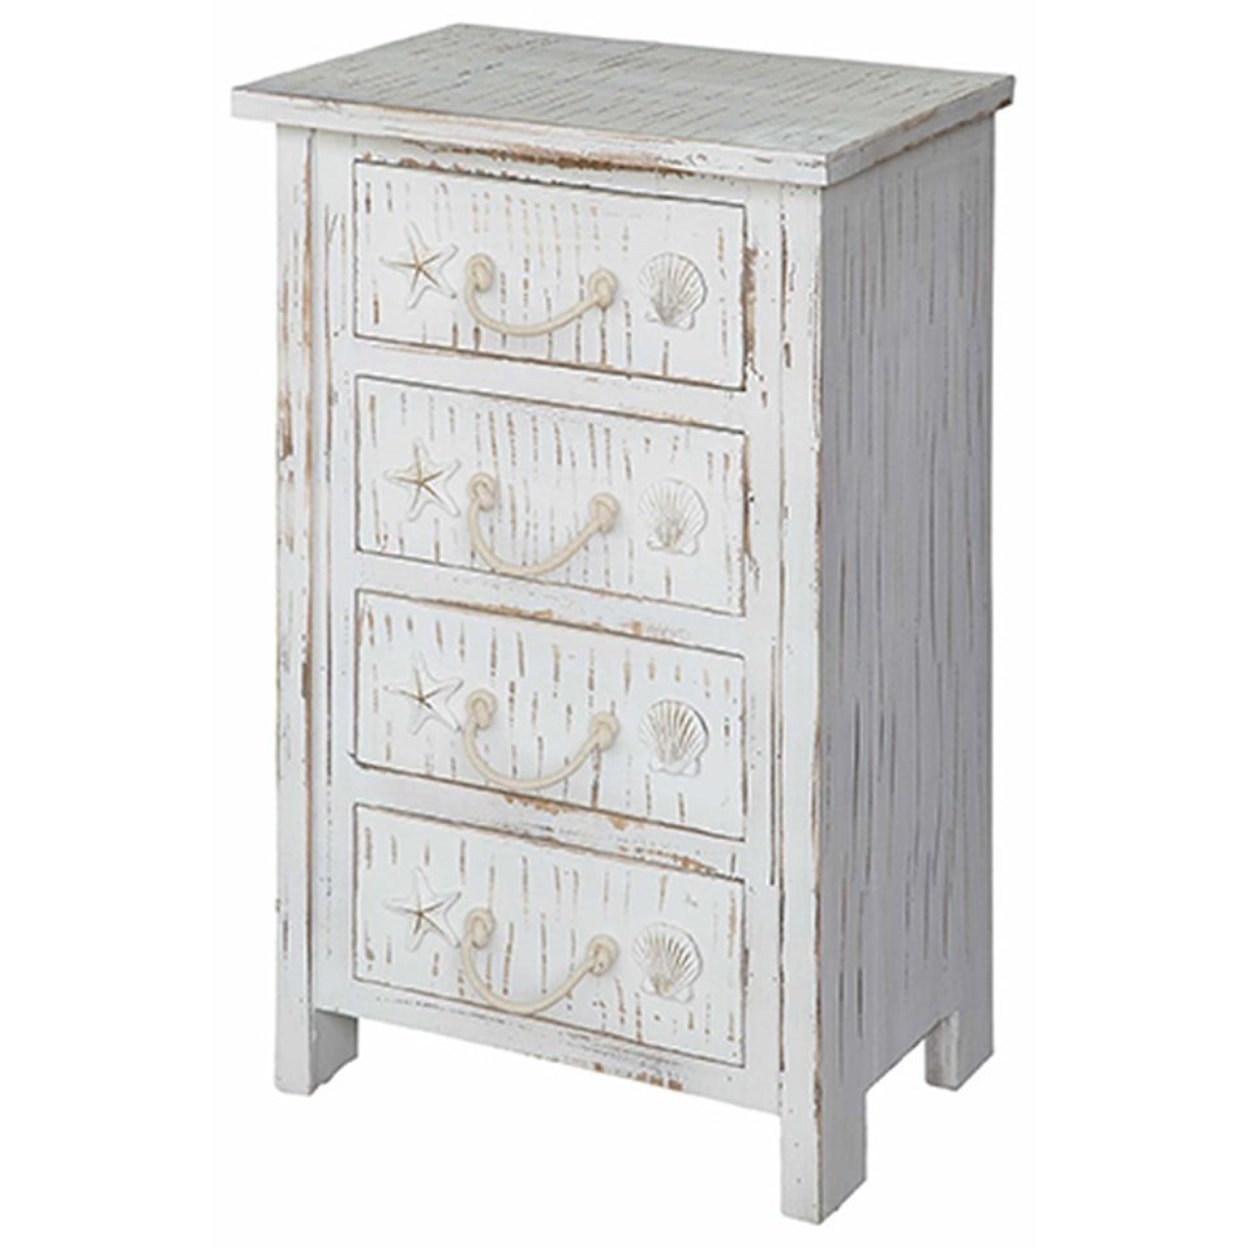 Crestview Collection Accent Furniture Seaside White Shell 4 Drawer Chest